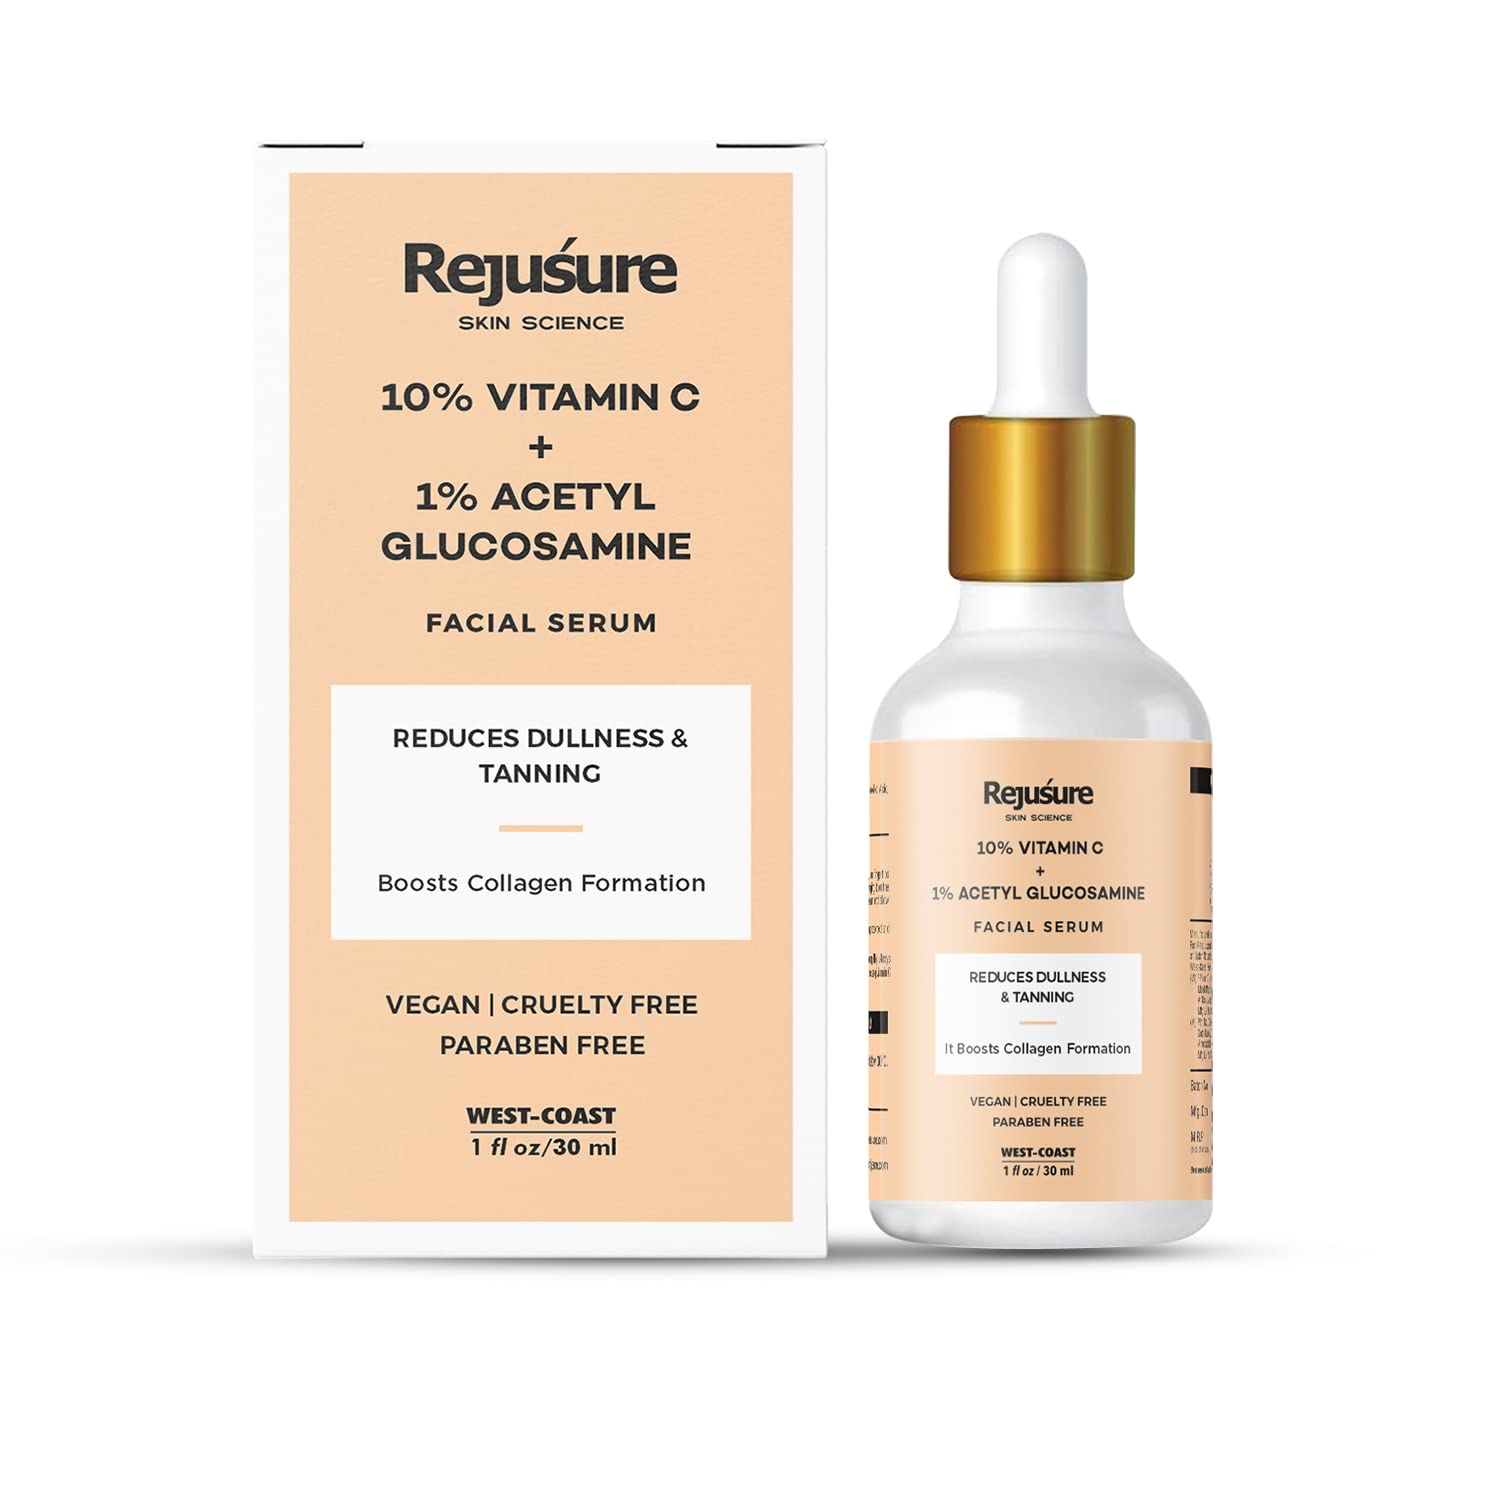 Rejusure 10% Vitamin C + 1% Acetyl Glucosamine Facial Serum to Boots Collagen Production & Protects from Environmental Stress– 30ml